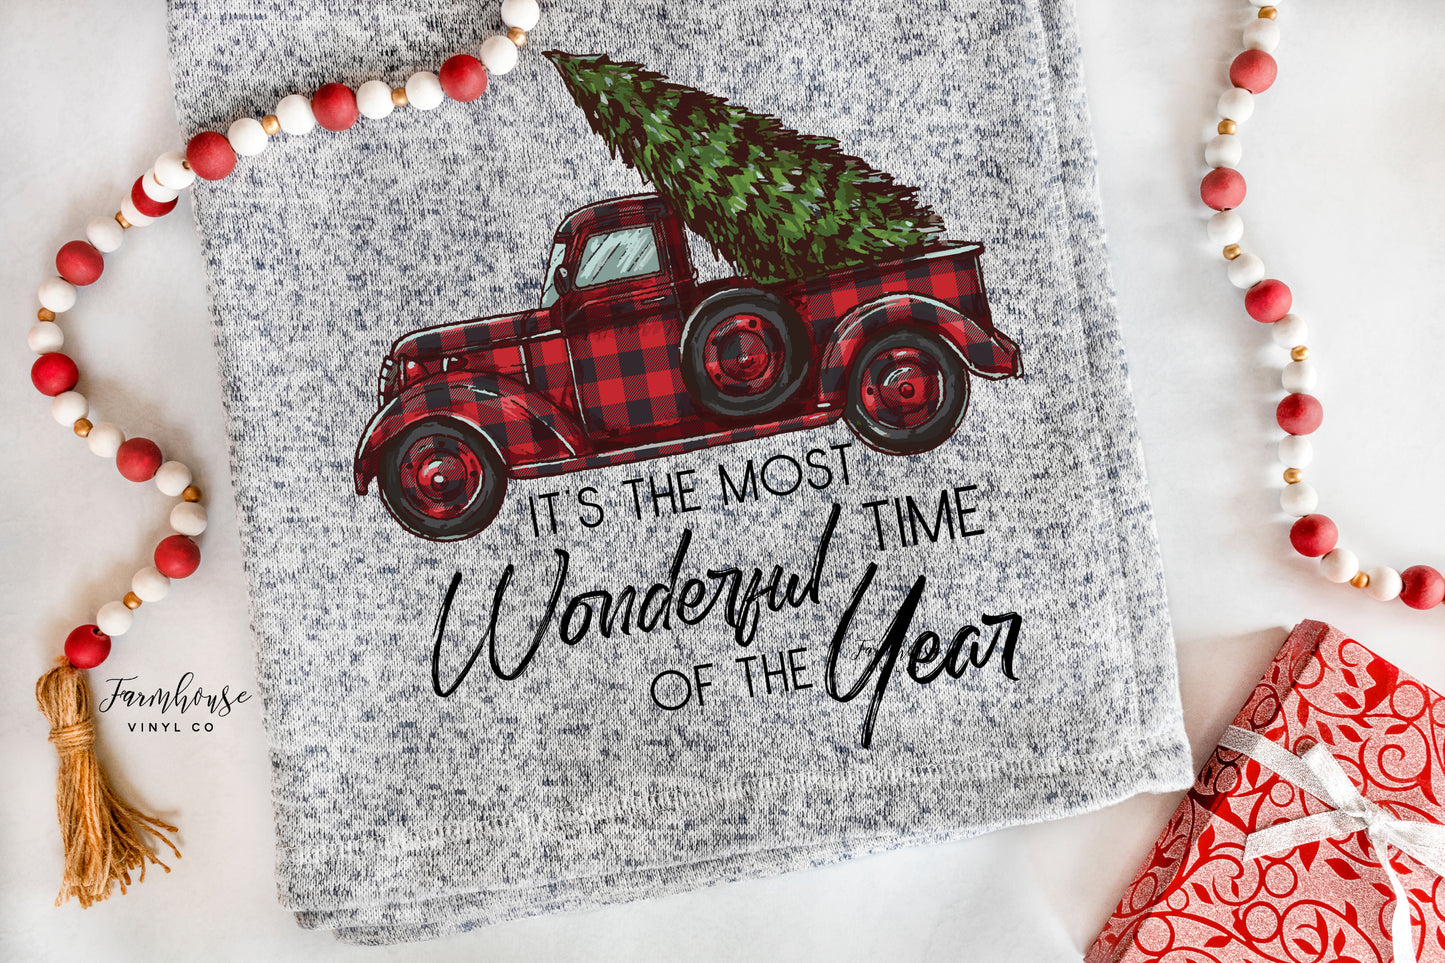 Christmas Plaid Truck It's The Most Wonderful Time of the Year Blanket - Farmhouse Vinyl Co